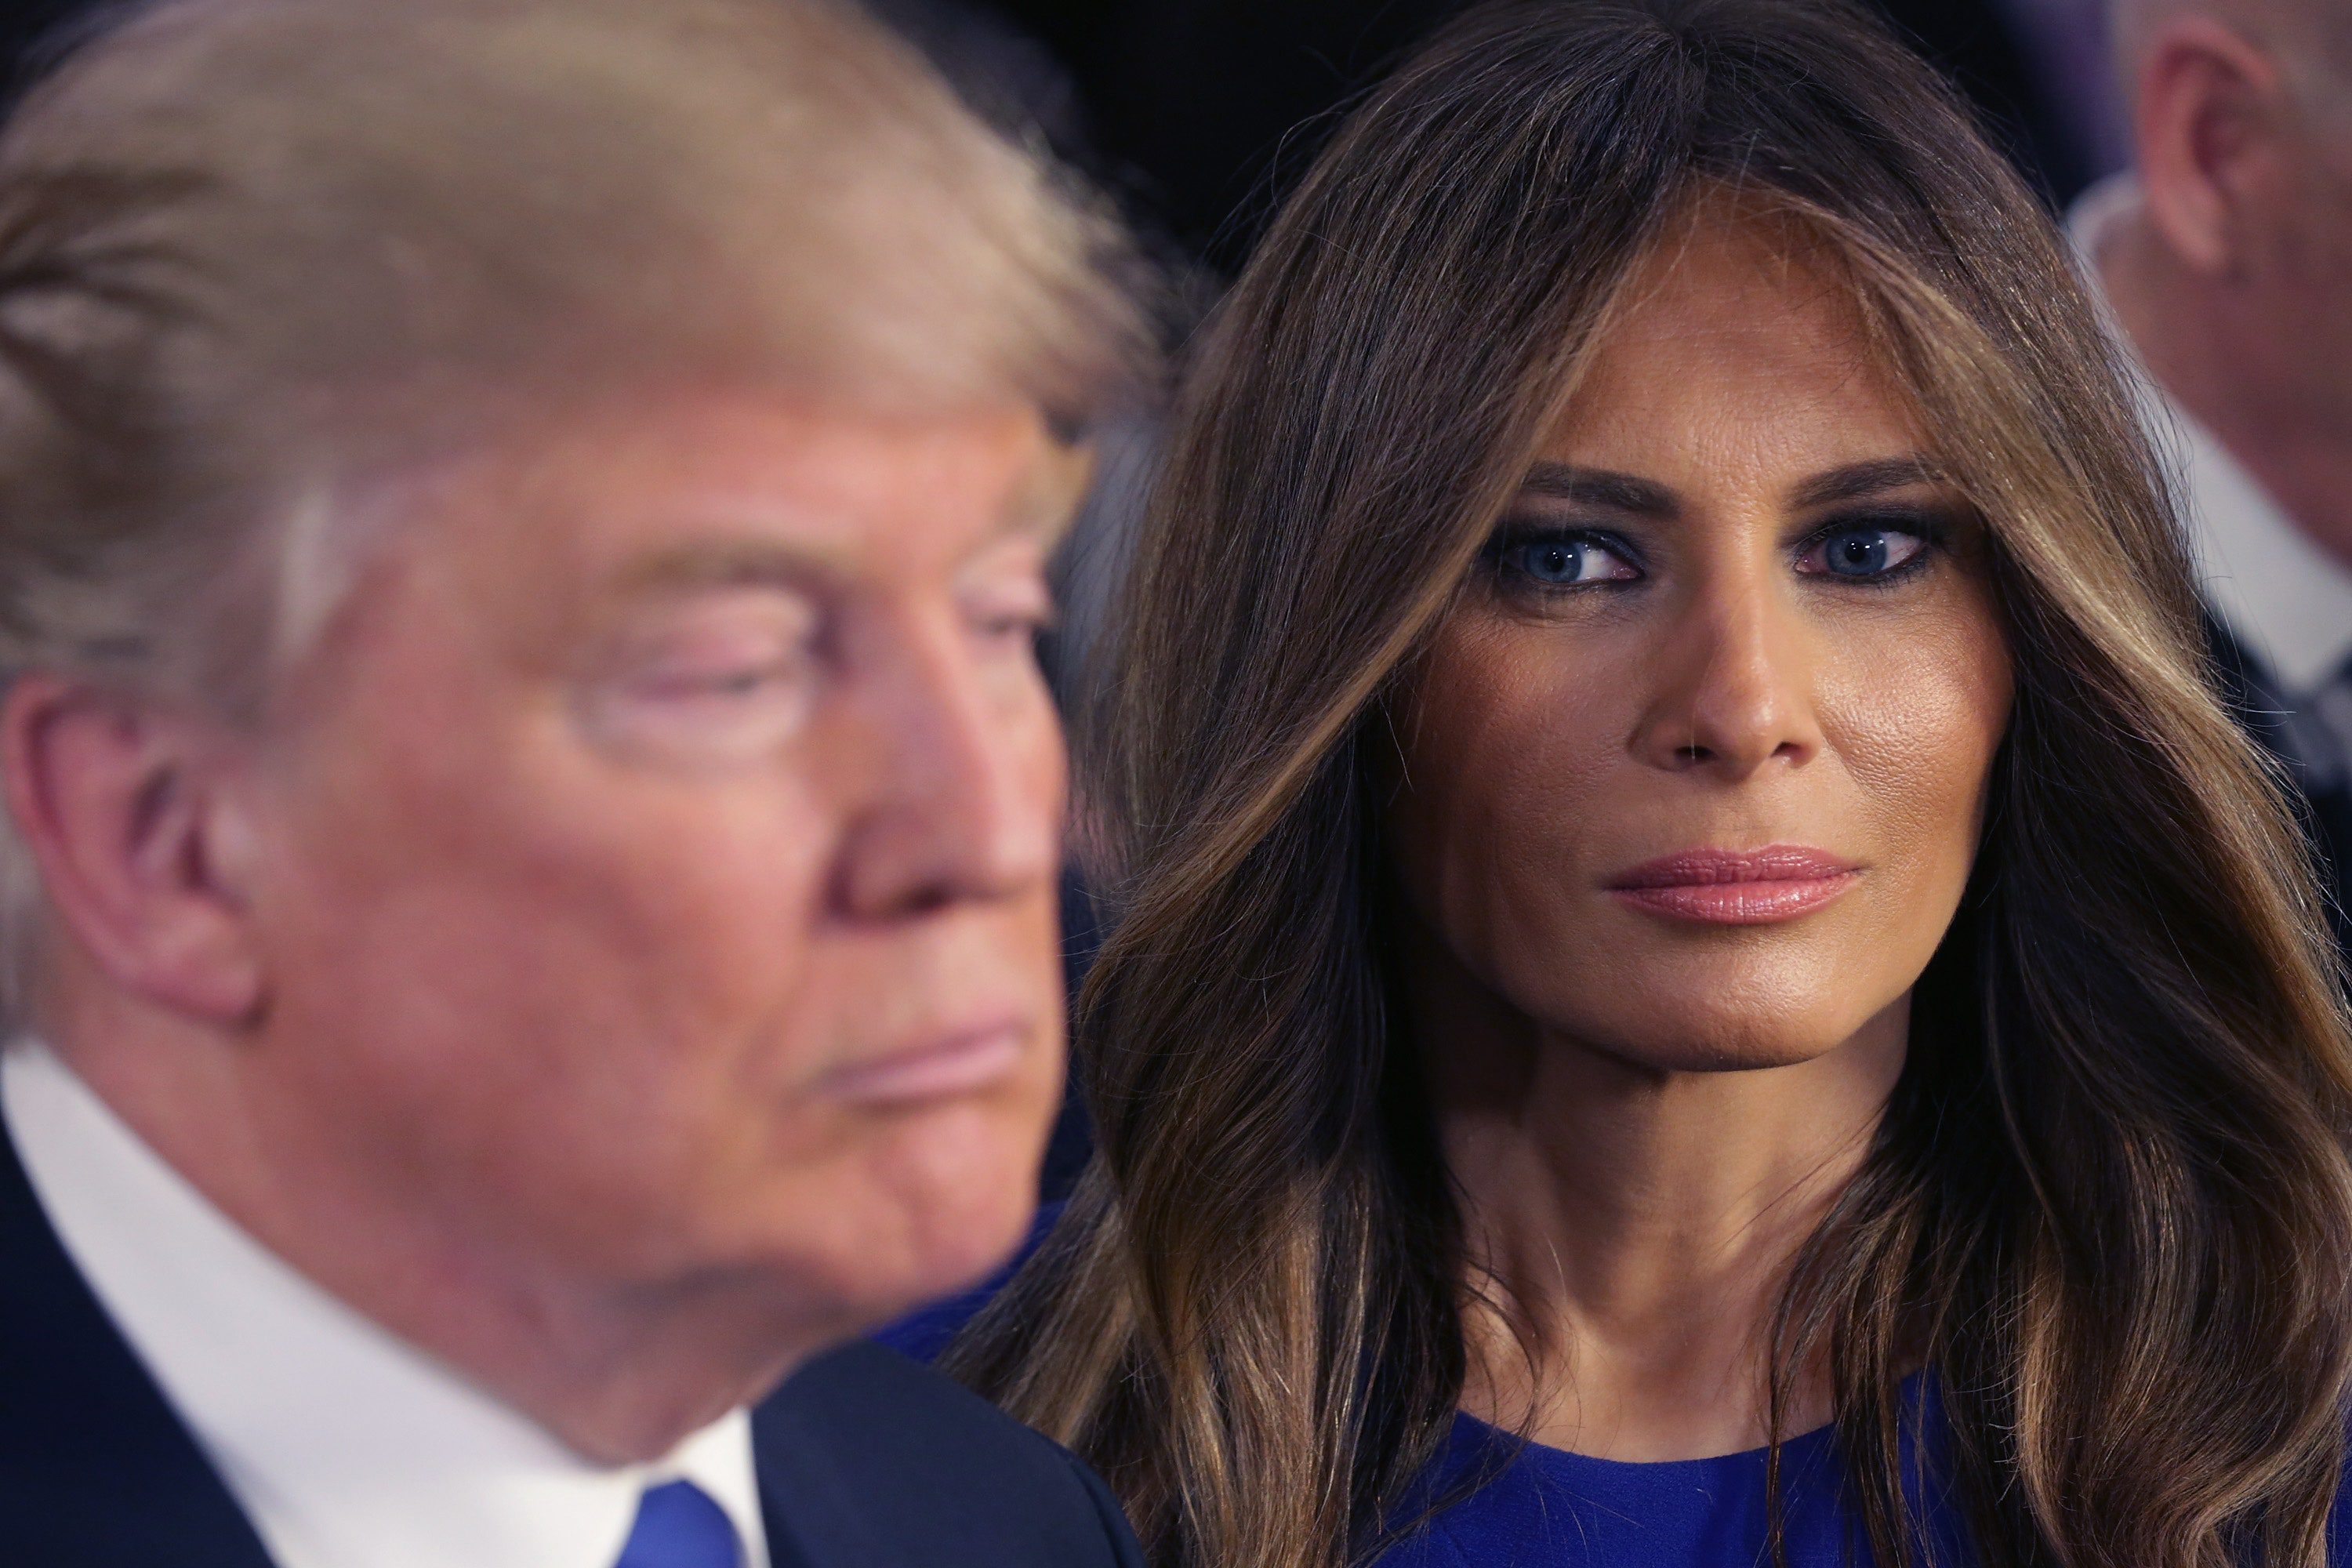 Melania Trump Wanted to “Humiliate” Her Husband After the Stormy Daniels Hush Money Deal Came to Light: Report